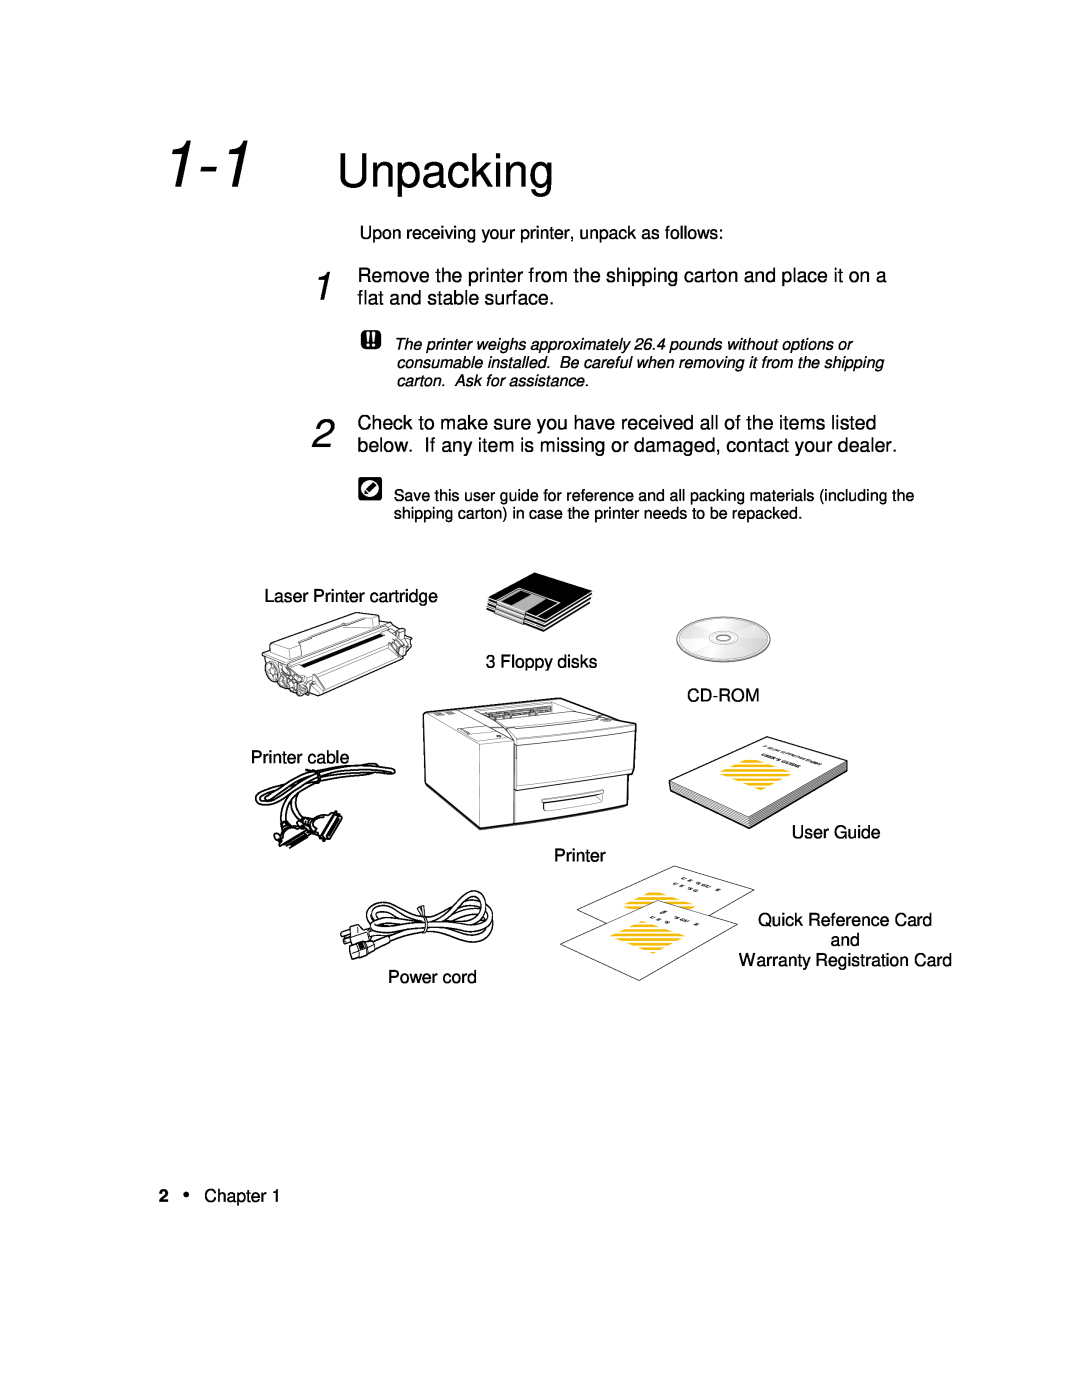 Xerox P12 manual Unpacking, Remove the printer from the shipping carton and place it on a, flat and stable surface 